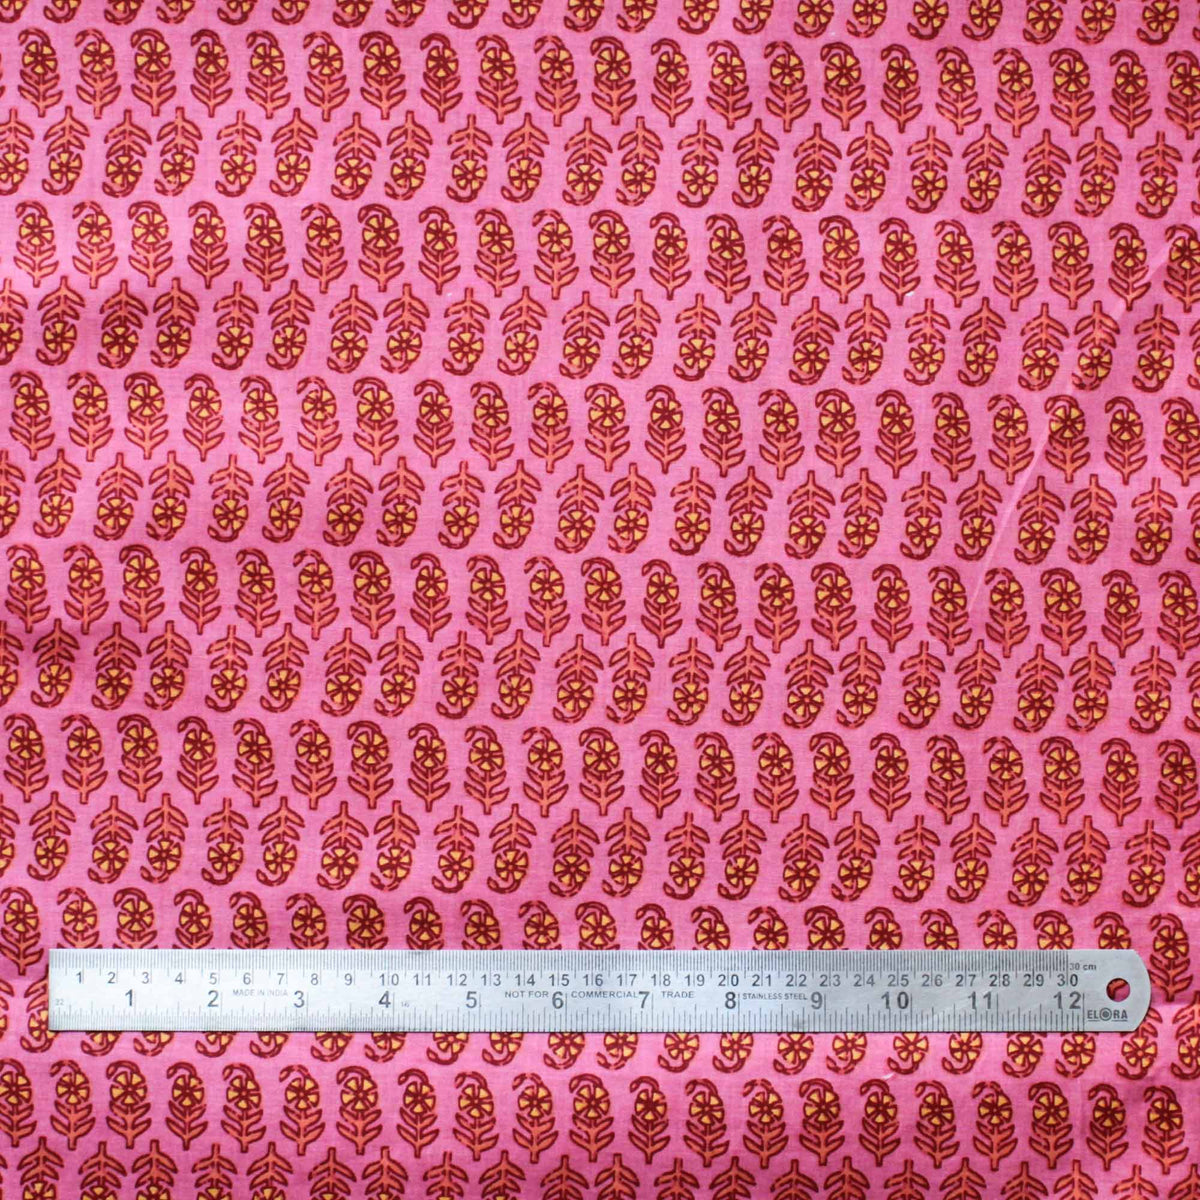 Small Yellow Flowers On Pink 100 % Cotton Fabric Design 389